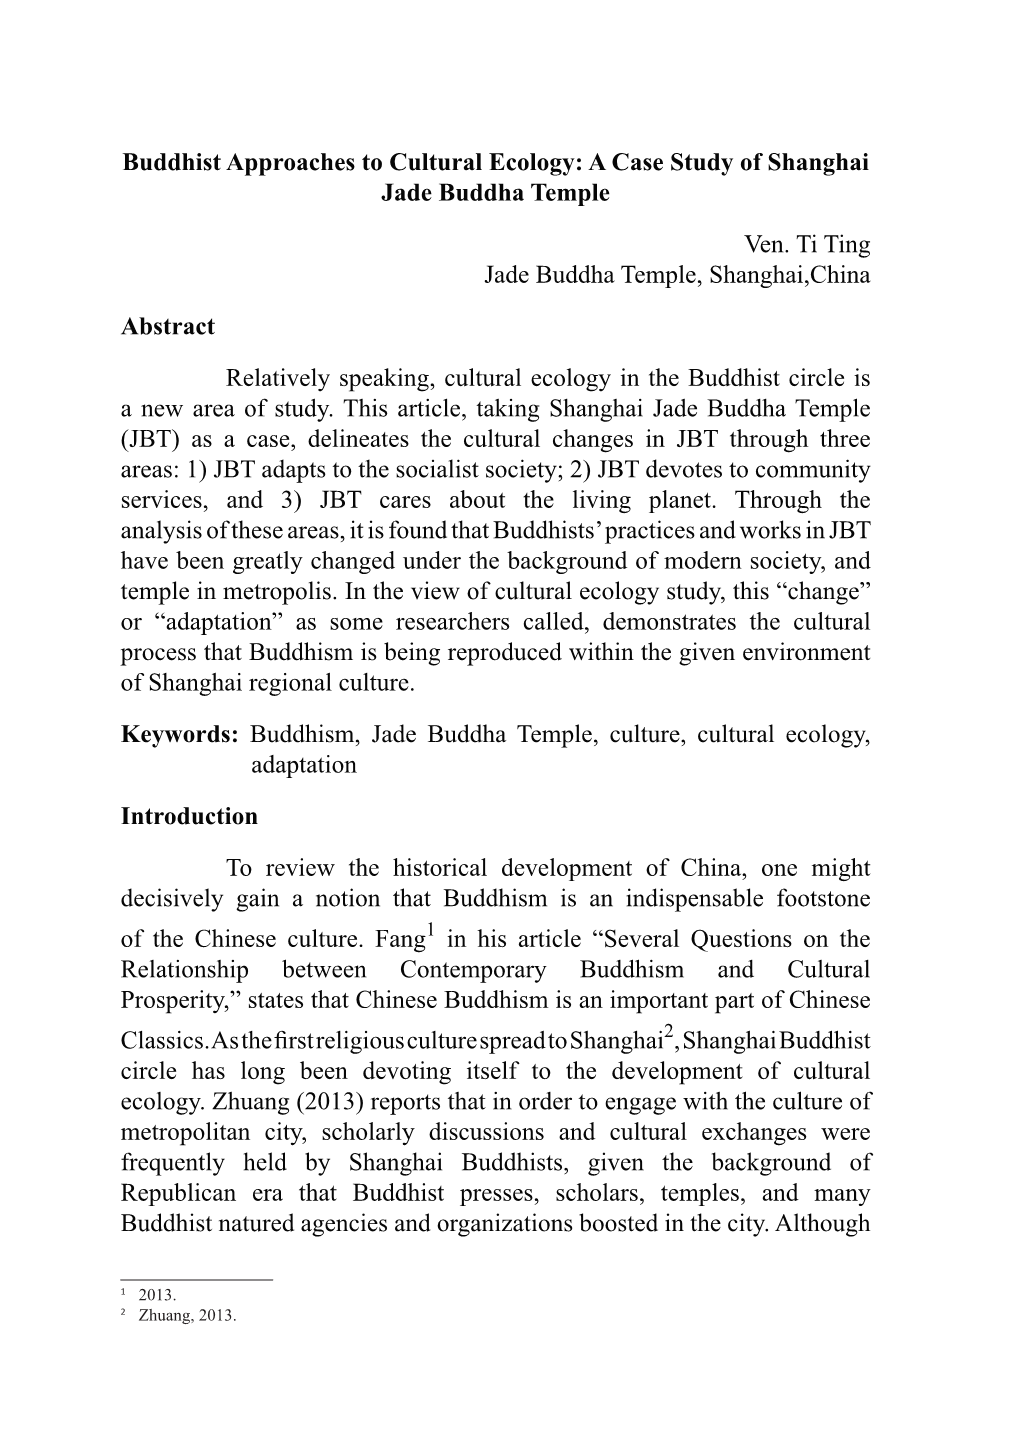 Buddhist Approaches to Cultural Ecology: a Case Study of Shanghai Jade Buddha Temple